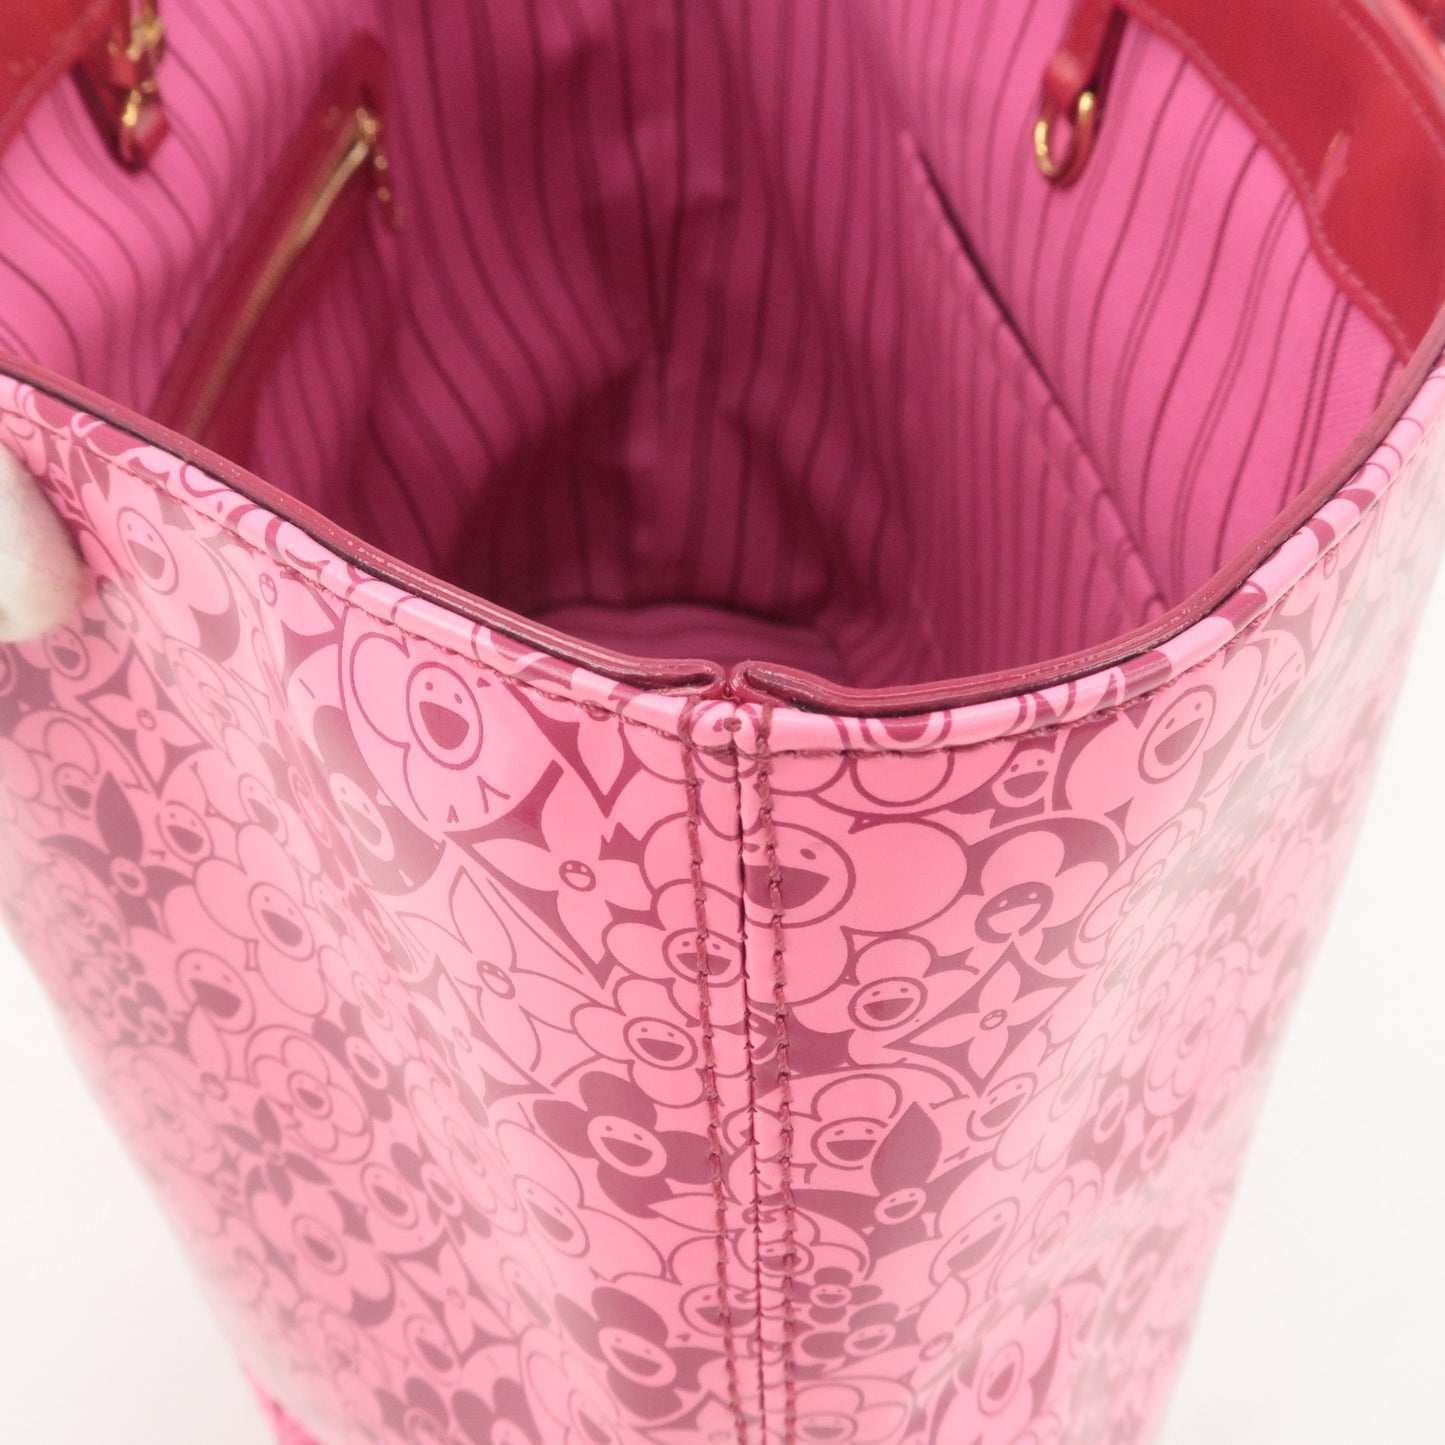 Louis-Vuitton-Cosmic-Blossom-PM-Tote-Bag-Rose-M93166 – dct-ep_vintage luxury  Store